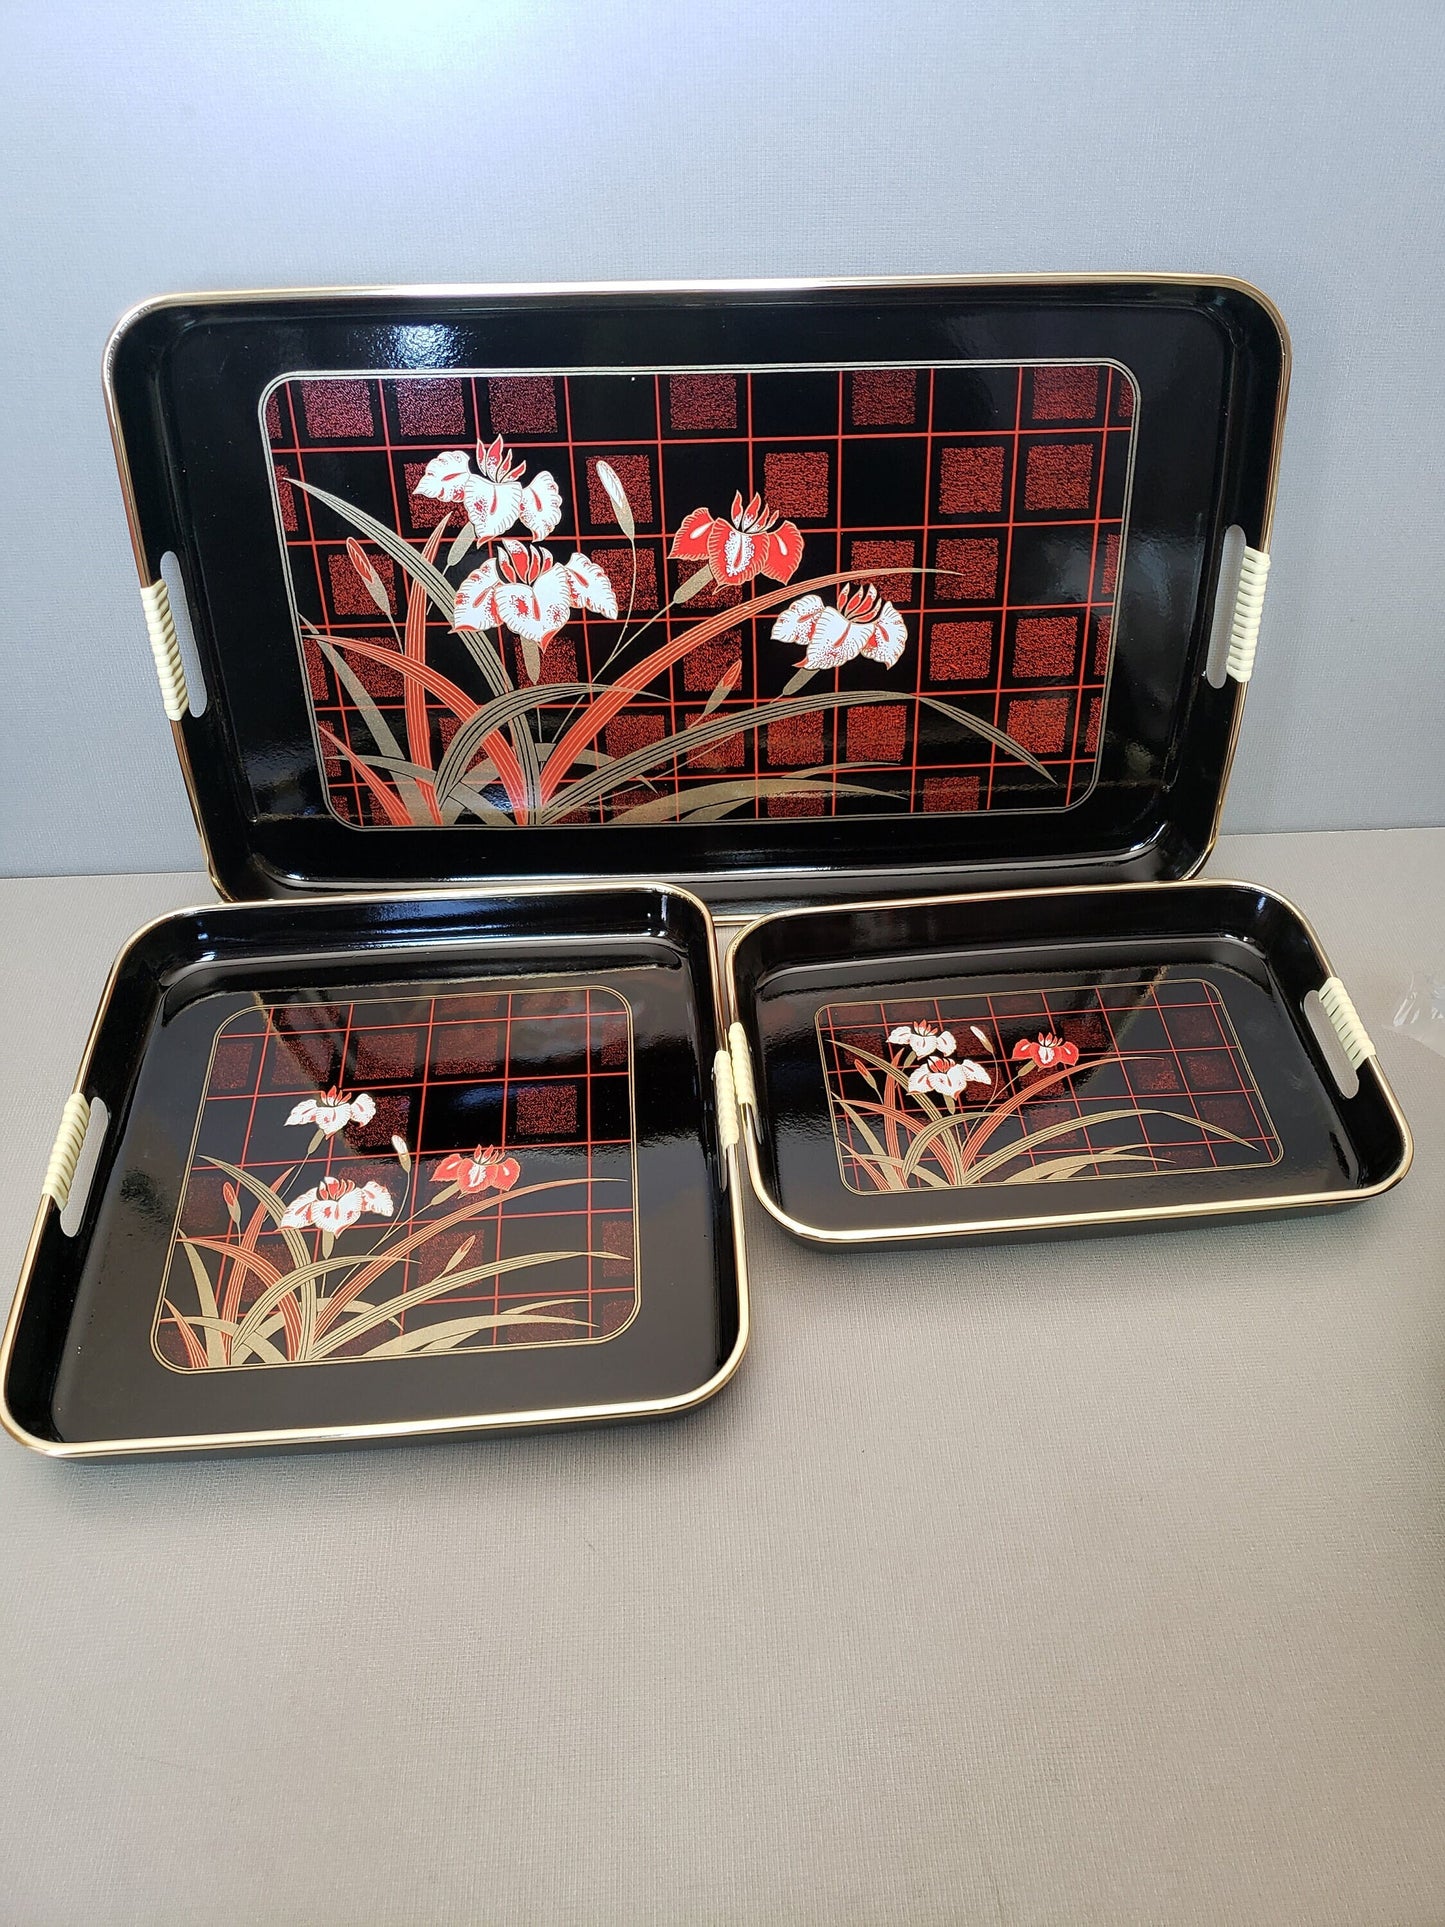 Vintage 1984 Hand-Decorated Lacquerware Tray Set